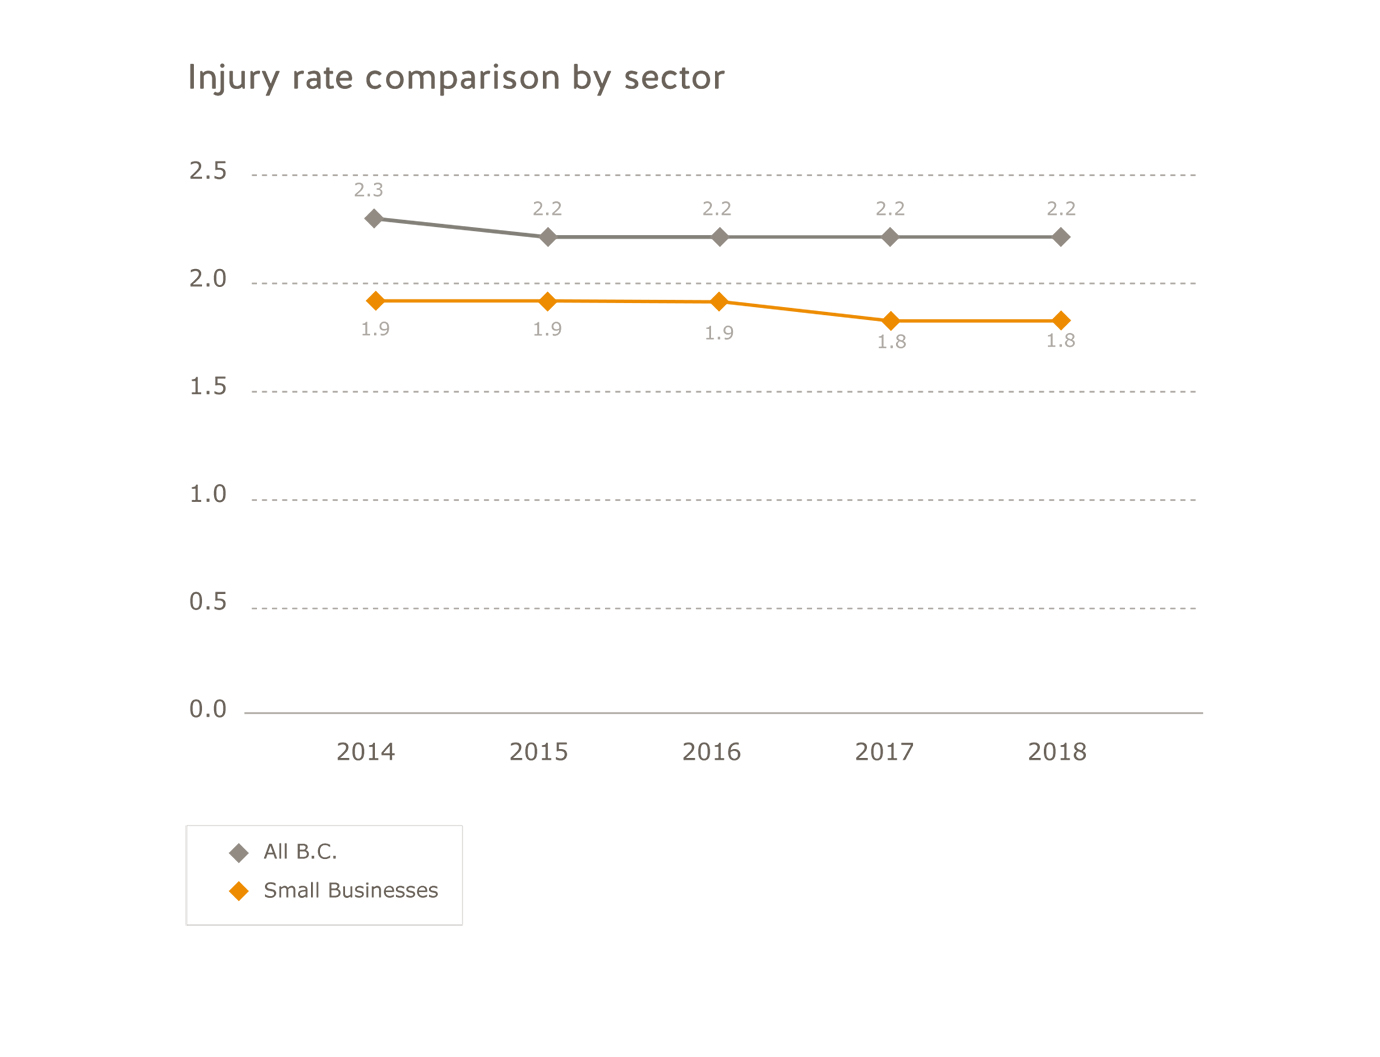 Small business industry injury rate comparison by sector for 2014 to 2018. All B.C.: 2014=2.3; 2015=2.2; 2016=2.2; 2017=2.2; 2018=2.2. Small businesses: 2014=1.9; 2015=1.9; 2016=1.9; 2017=1.8; 2018=1.8